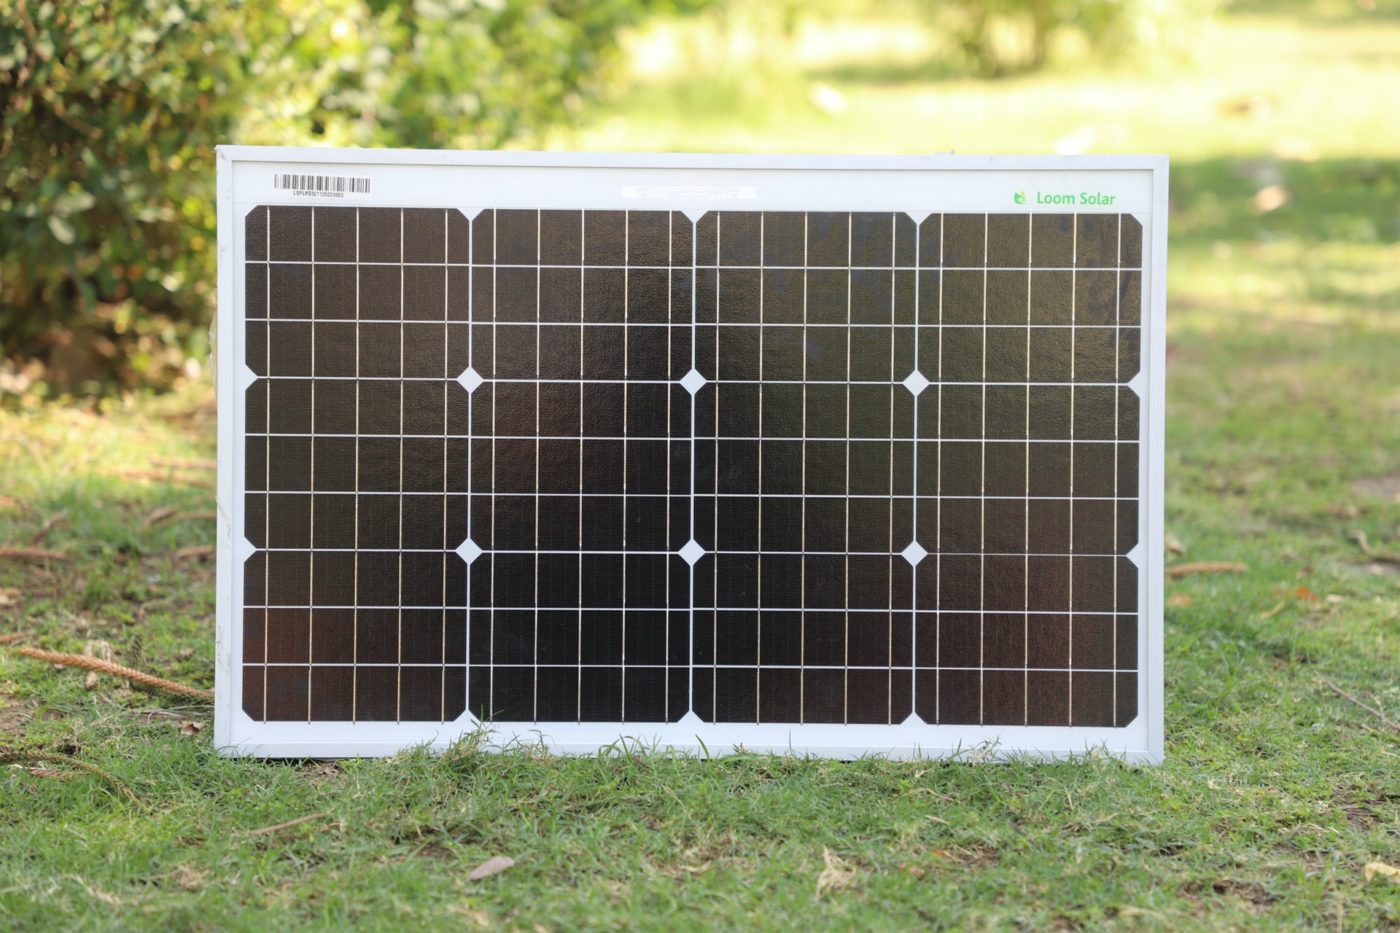 How to buy solar panel for campervan